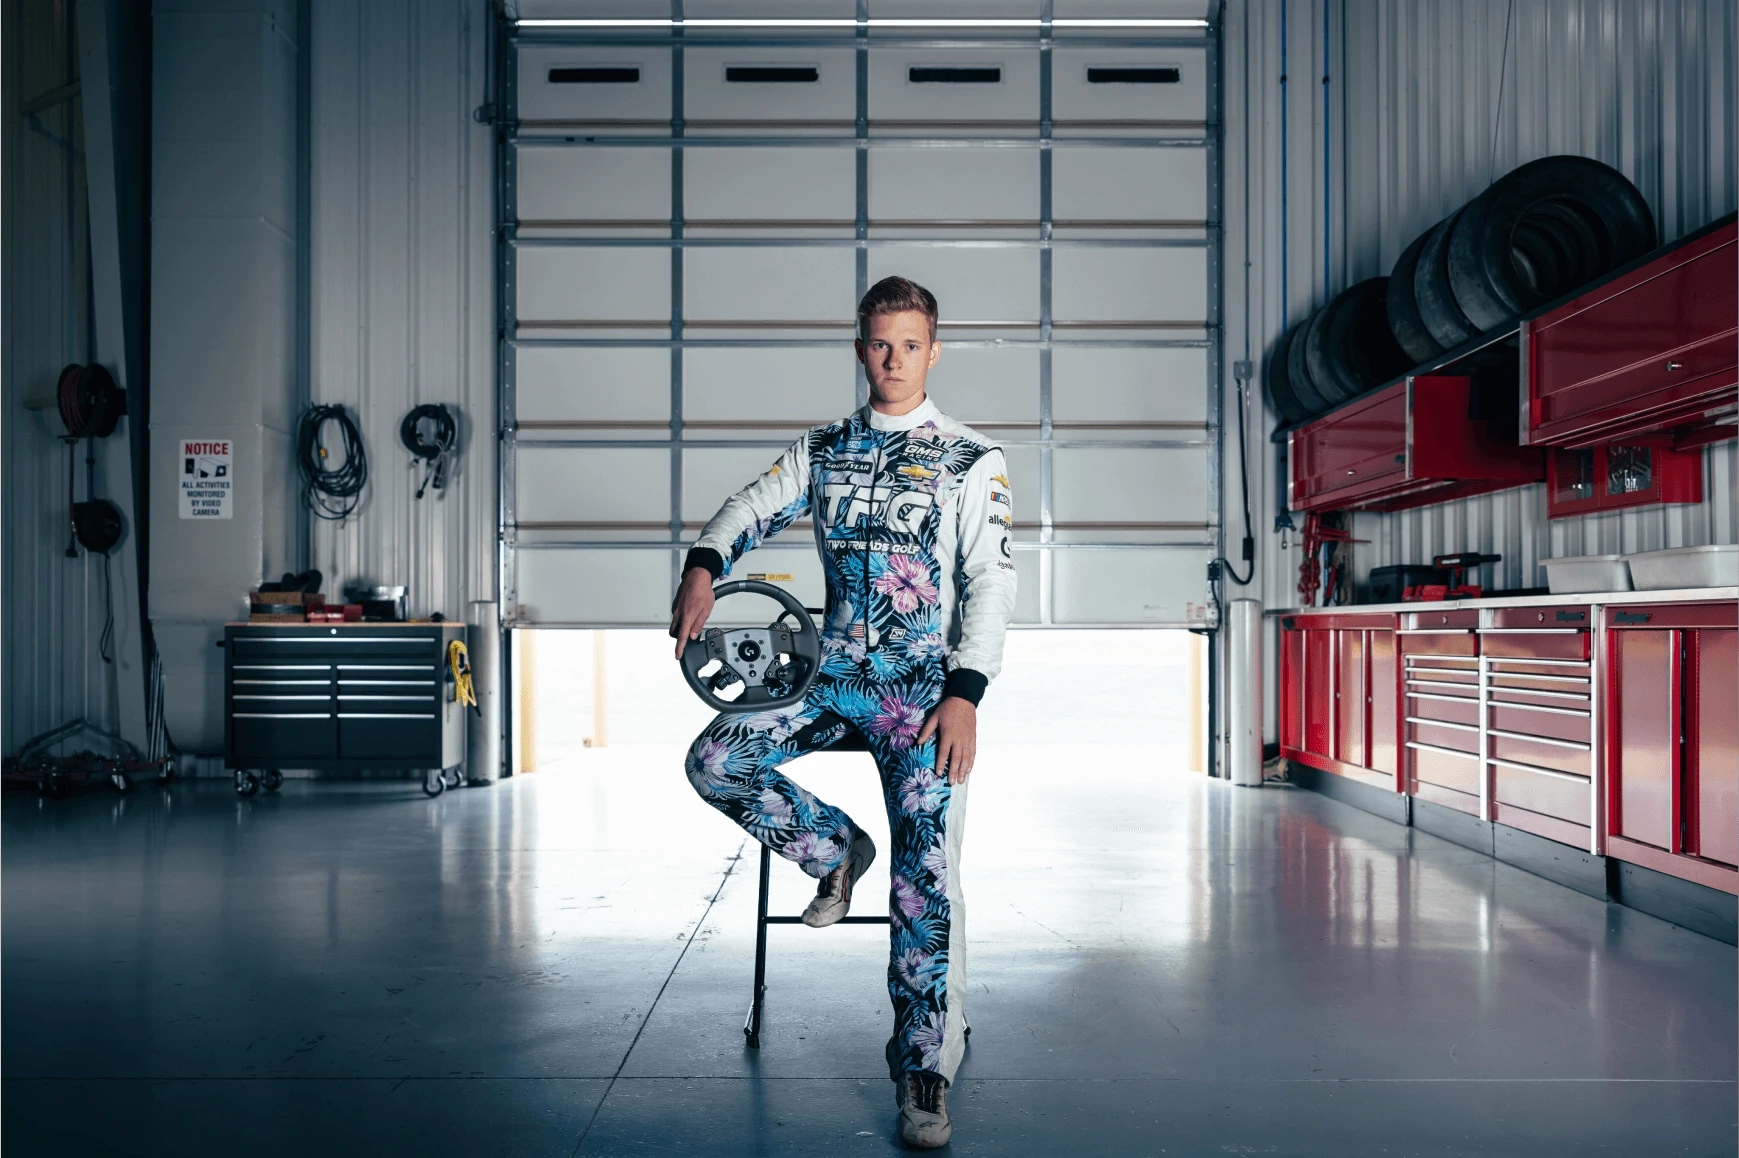 Professional stock car driver Jack Wood wears his racing uniform and sits on a stool in a garage holding a Logitech G PRO Wheel.